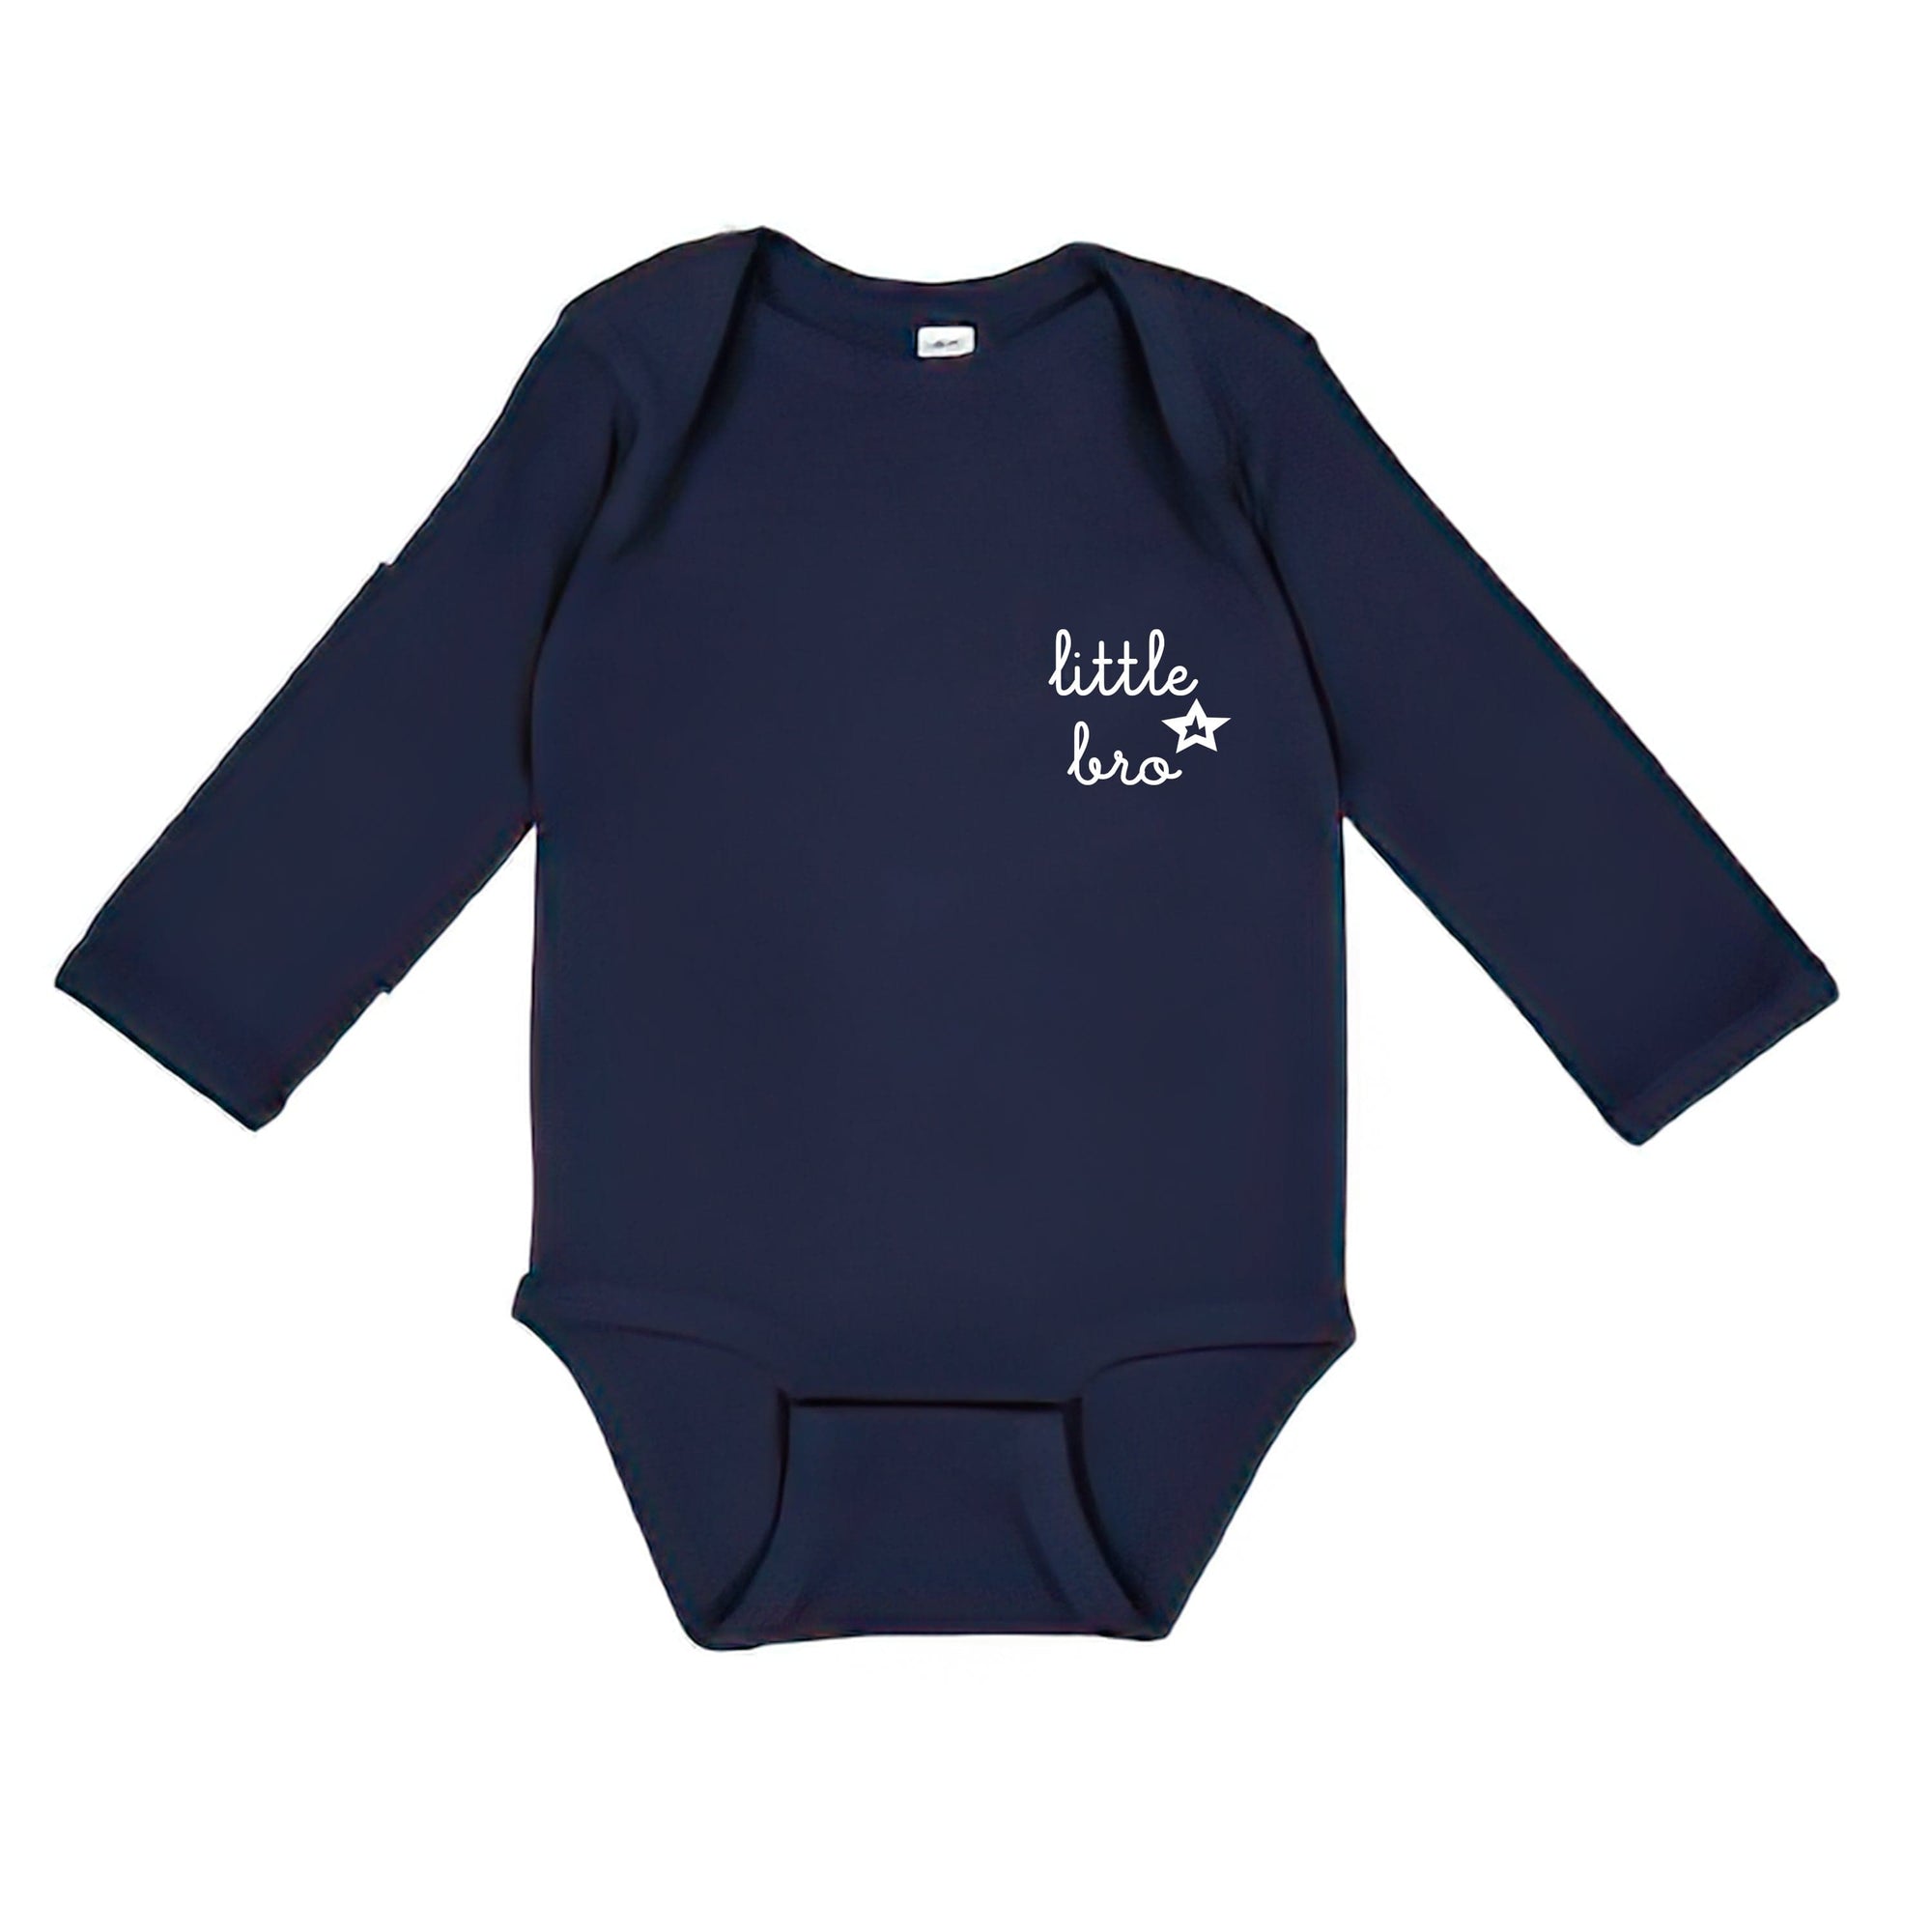 juju + stitch Personalized Custom Embroidered Baby & Toddler NB / Navy Little Bro little bro + little sis Baby Longsleeve Onesie